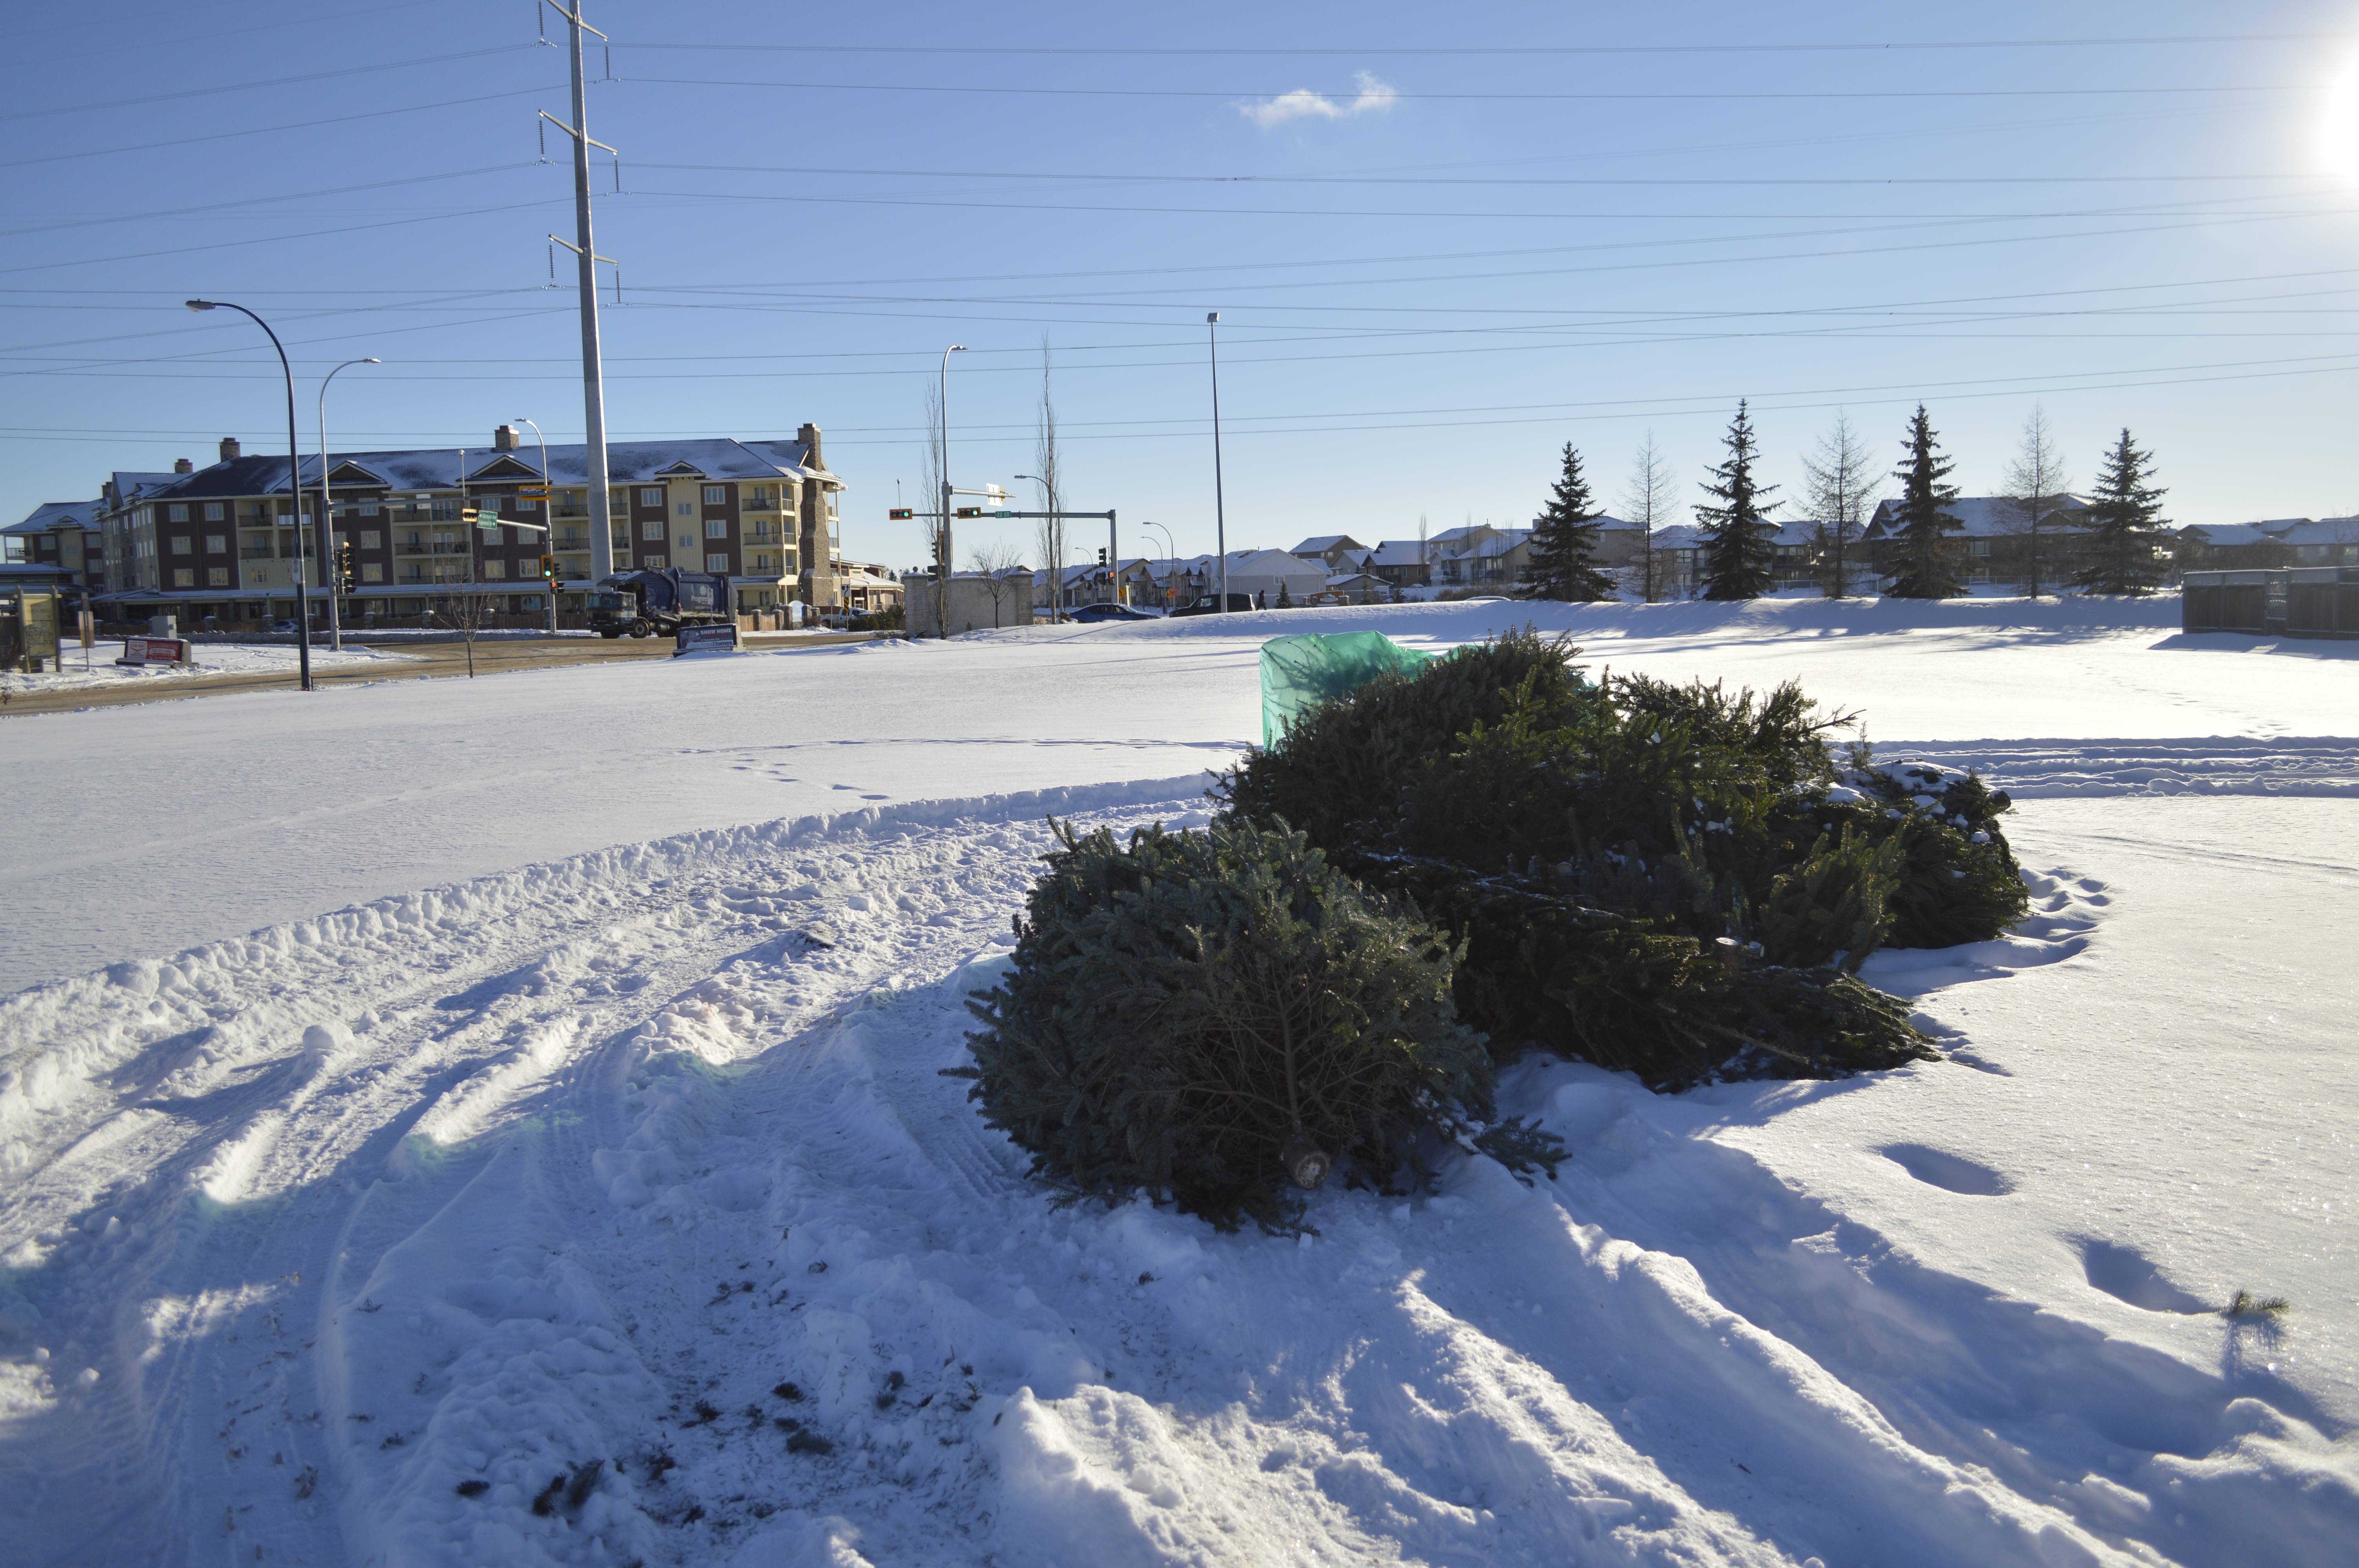 SEASON’S END - Christmas trees lay at the disposal site in Aspen Ridge